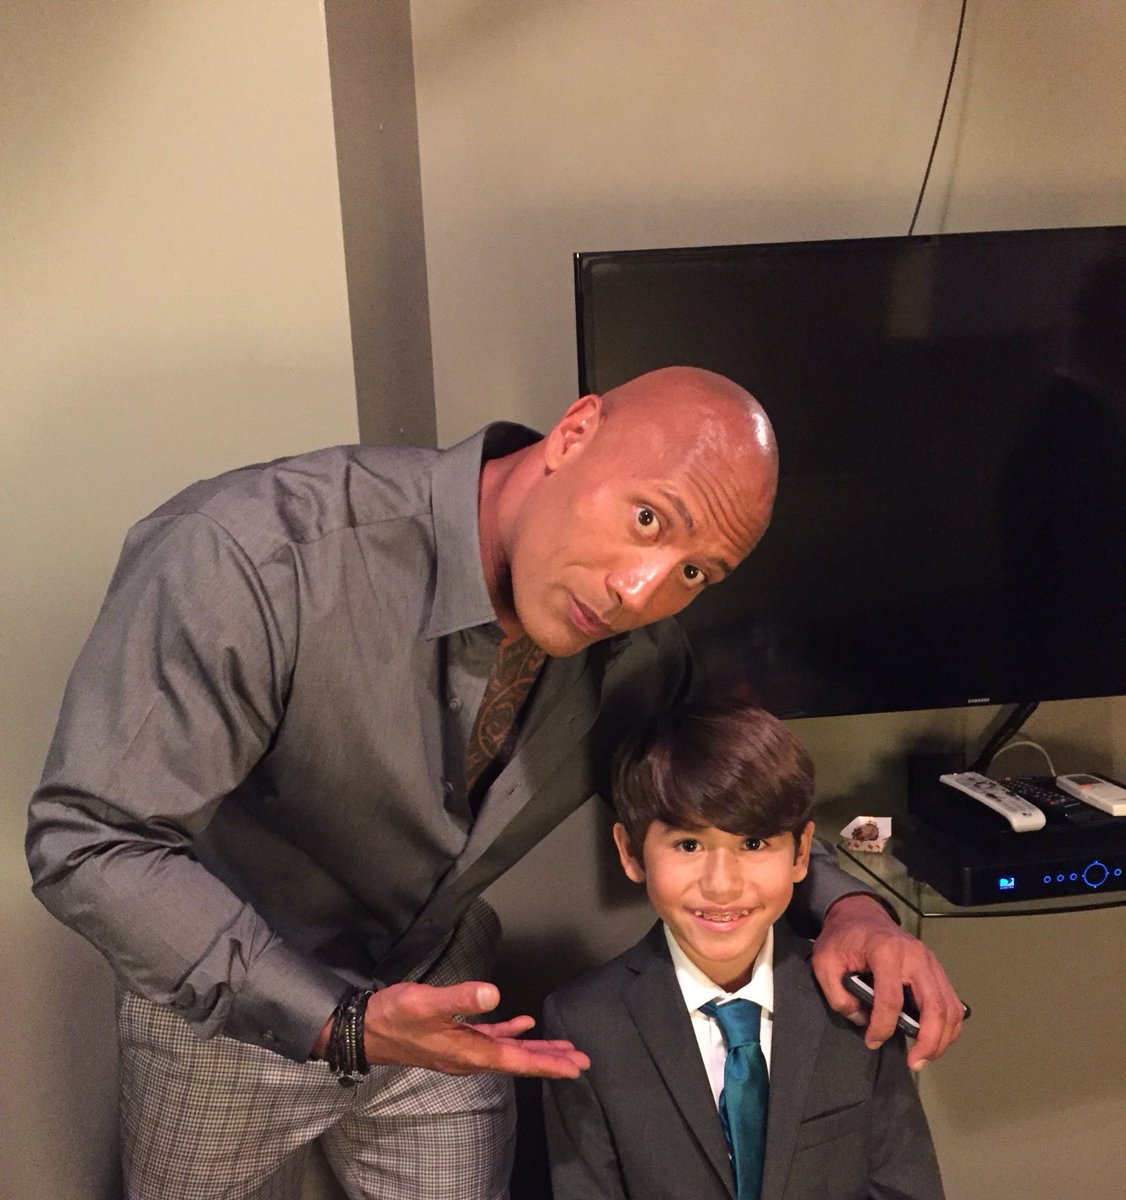 RT @Lin_Manuel: My nephew Luisito & @therock.
???? credit: the coolest uncle ever, from now on https://t.co/AJMLspBv0z